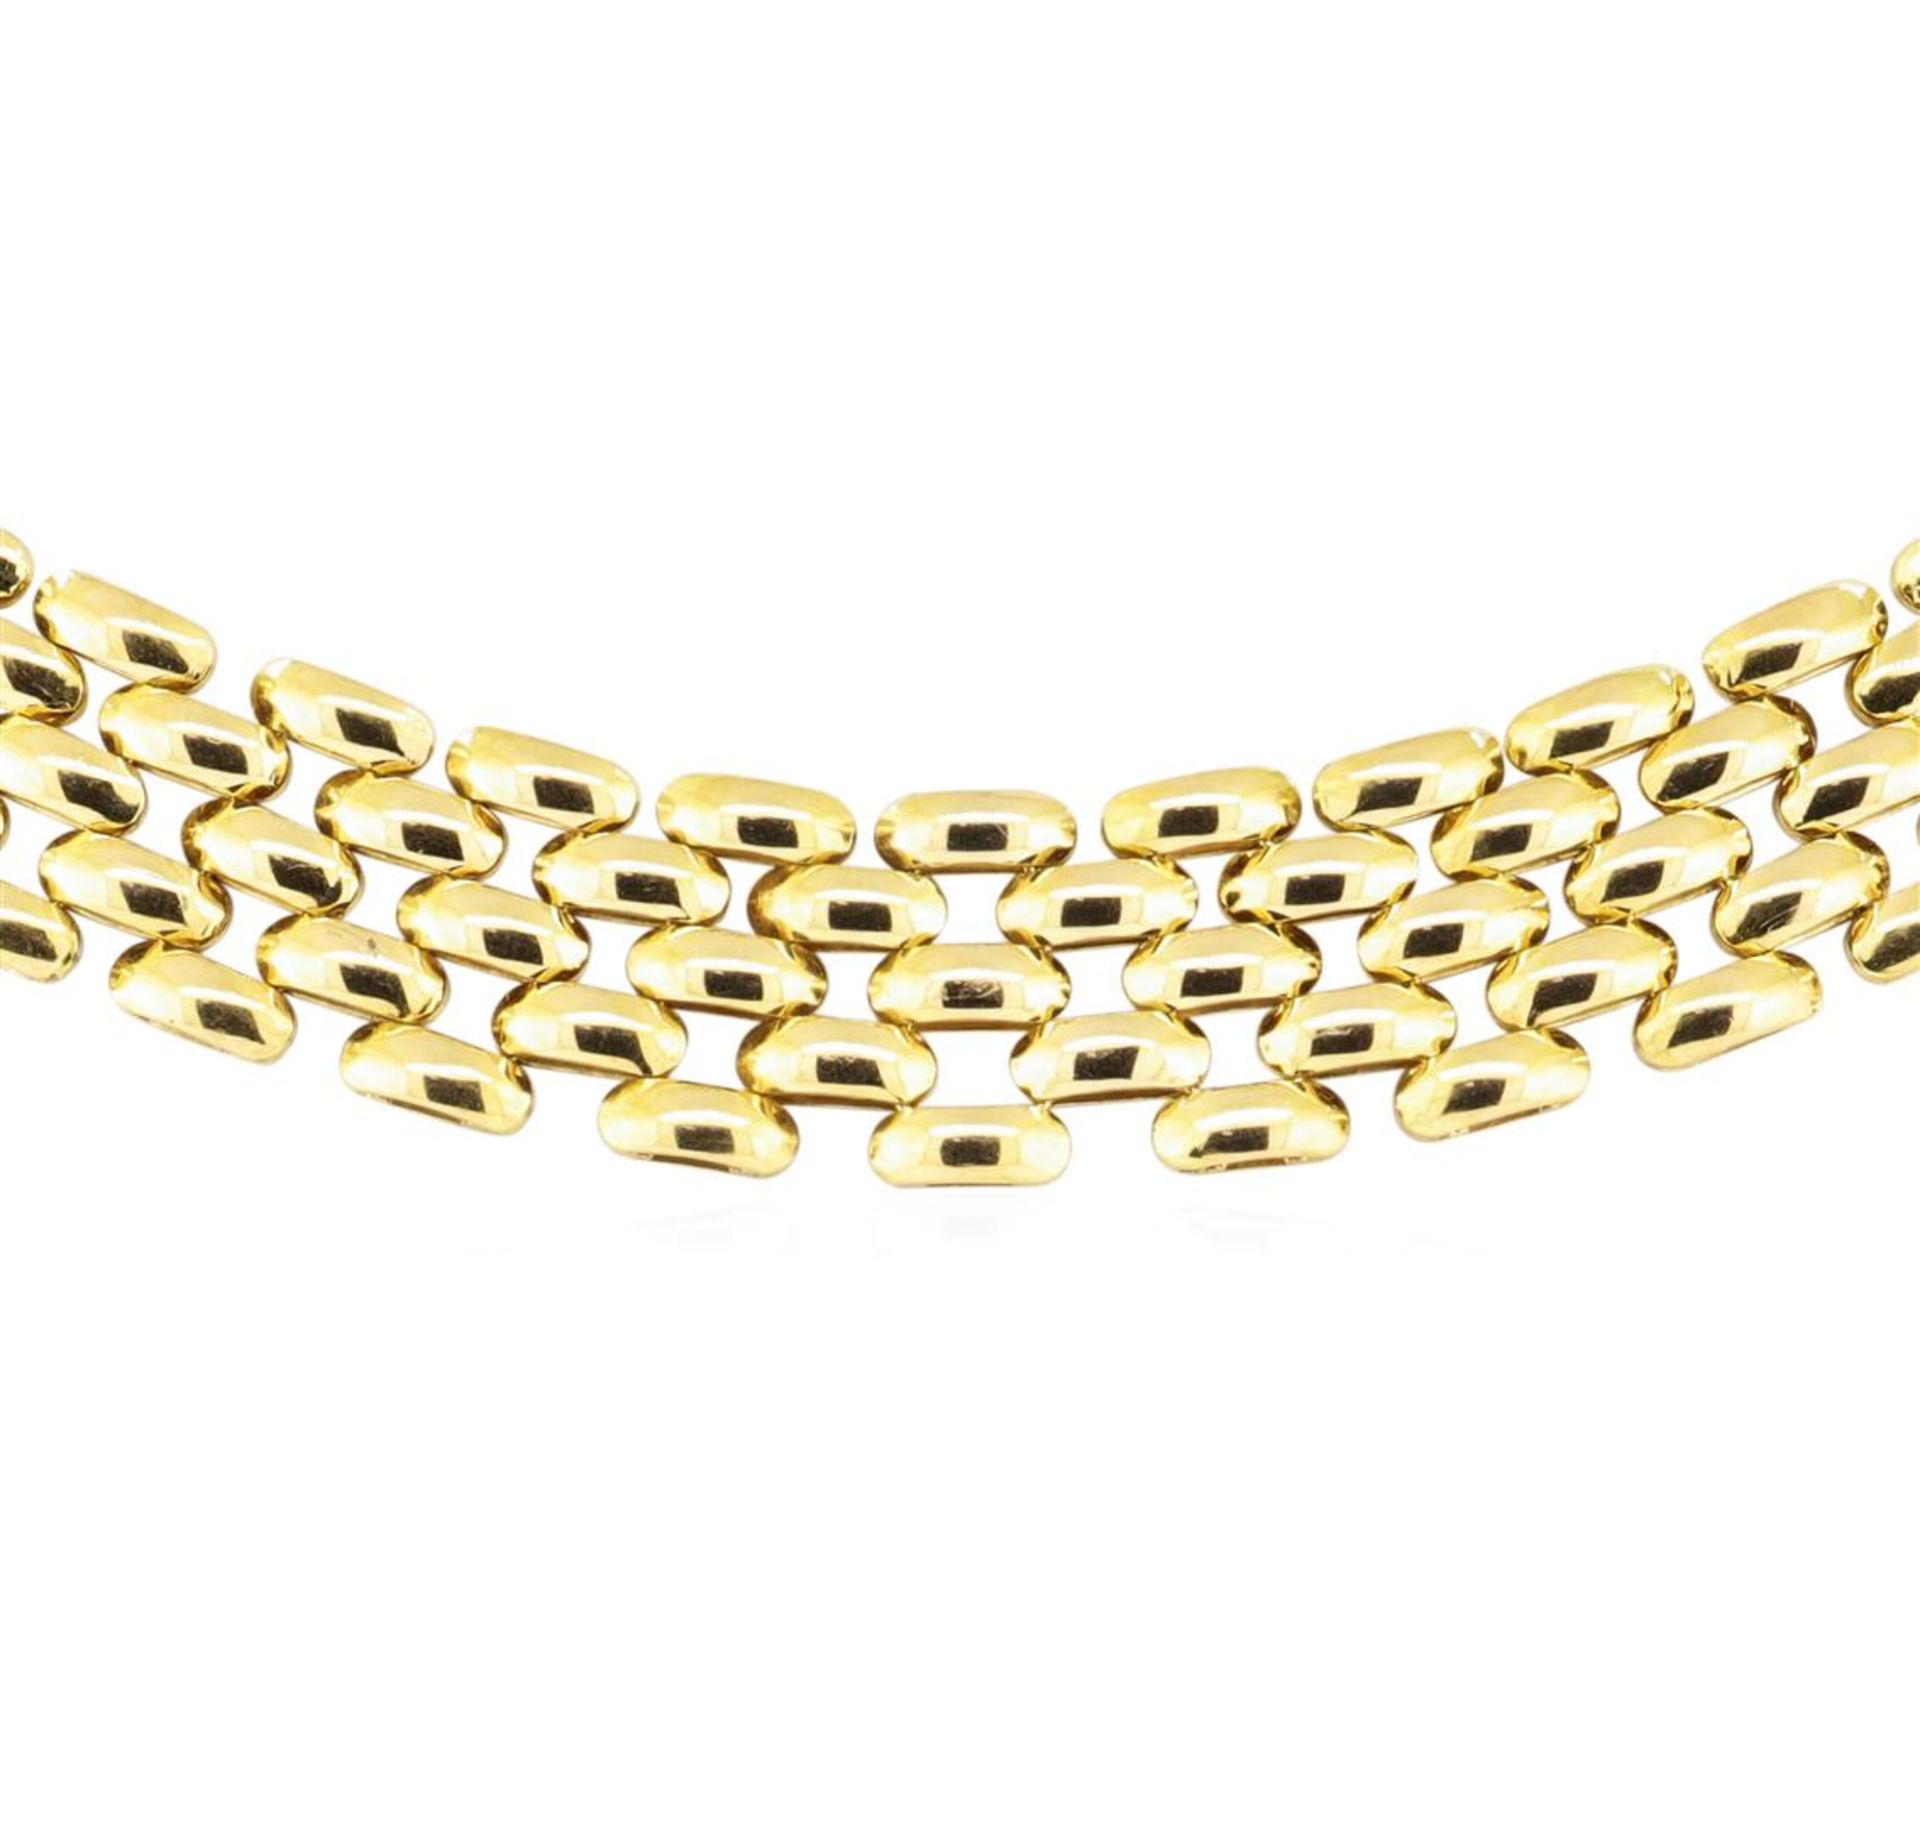 17.75 Inch Five Row Panther Link Chain - 18KT Yellow Gold - Image 2 of 2